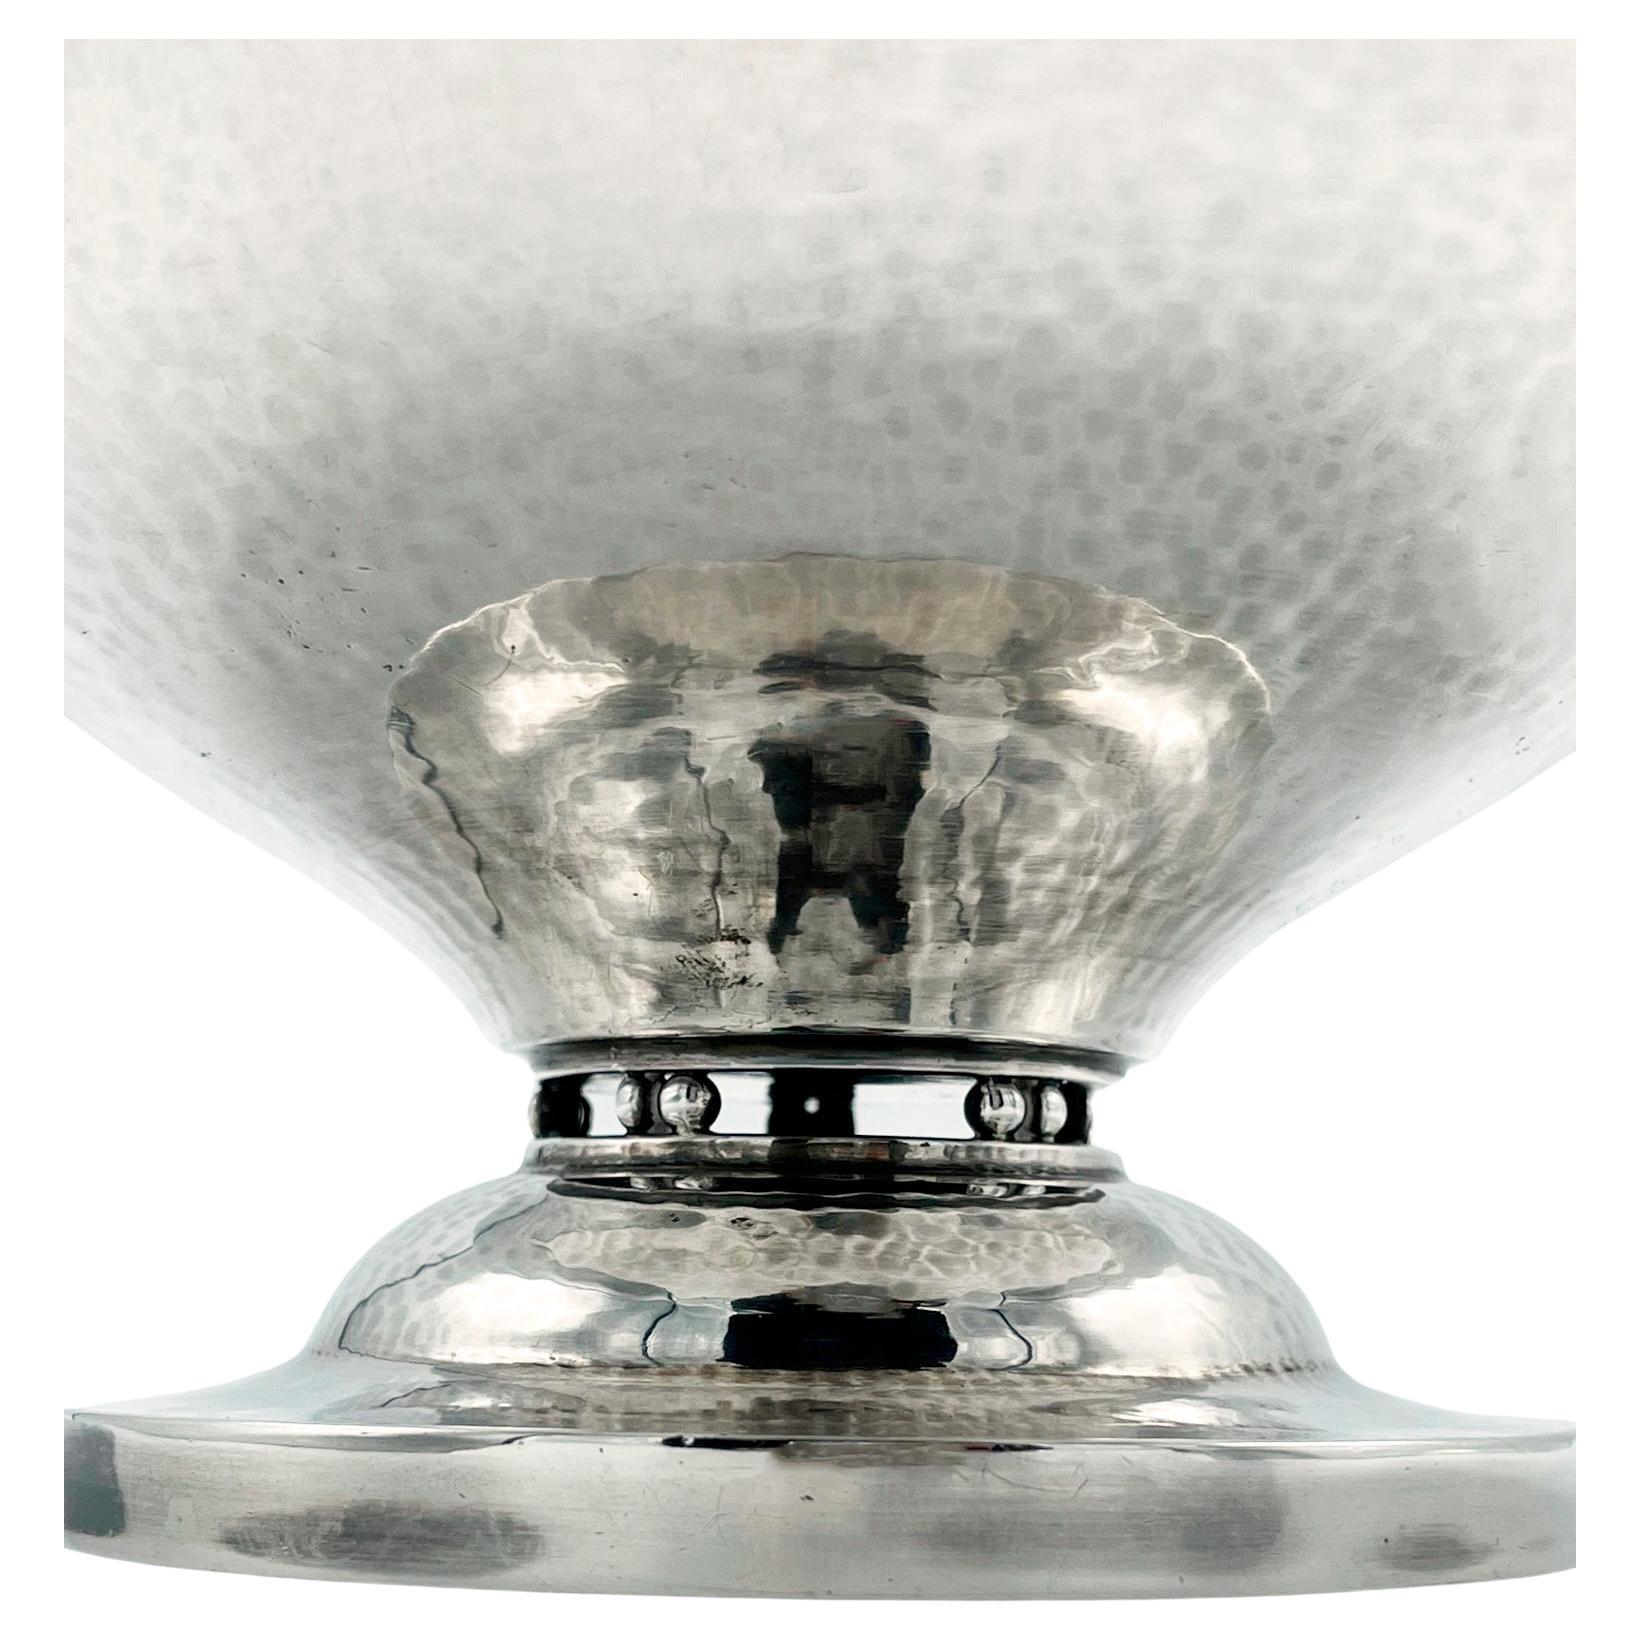 GEORG JENSEN STERLING SILVER FOOTED BOWL. 
The sterling silver bowl marked #413/B, with the Georg Jensen trademark used 1925-1932, designer Johan Rohde.
Dimensions: 7.25